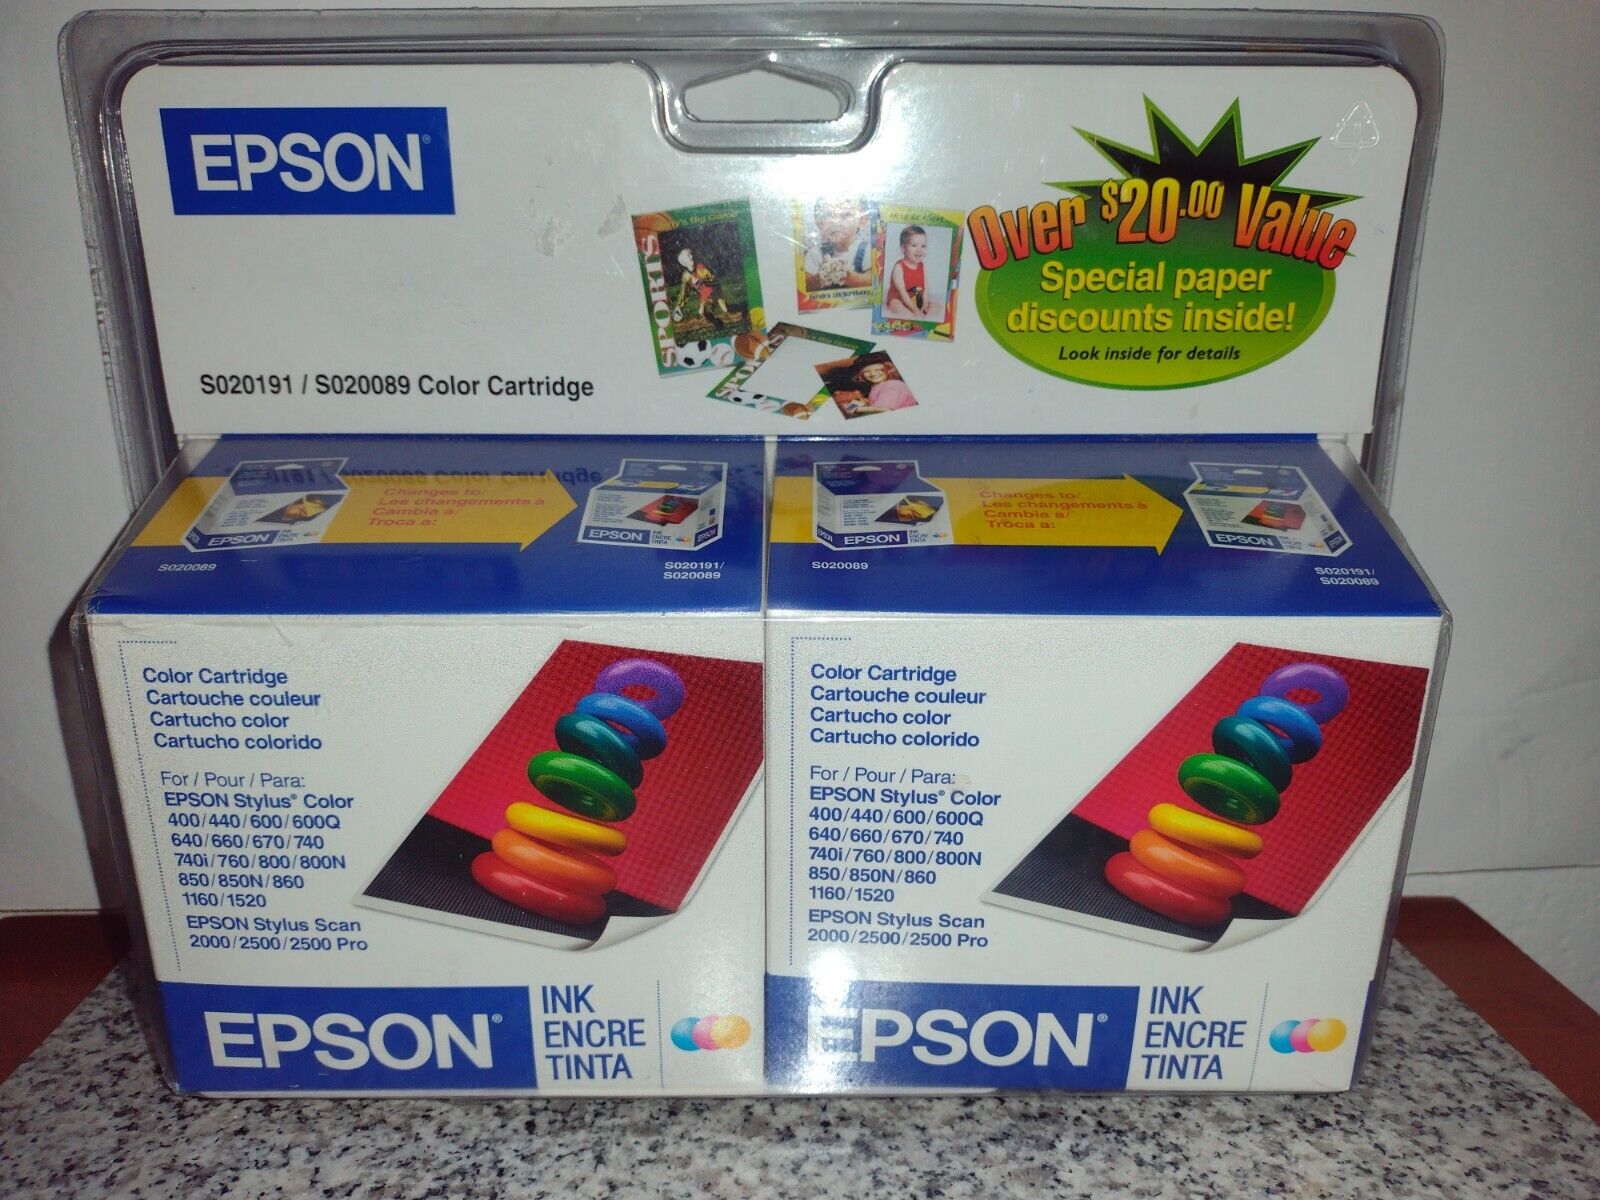 TWO Epson S020191 / S020089 Genuine Tri-Color Ink Cartridge. Double Pack. NEW.